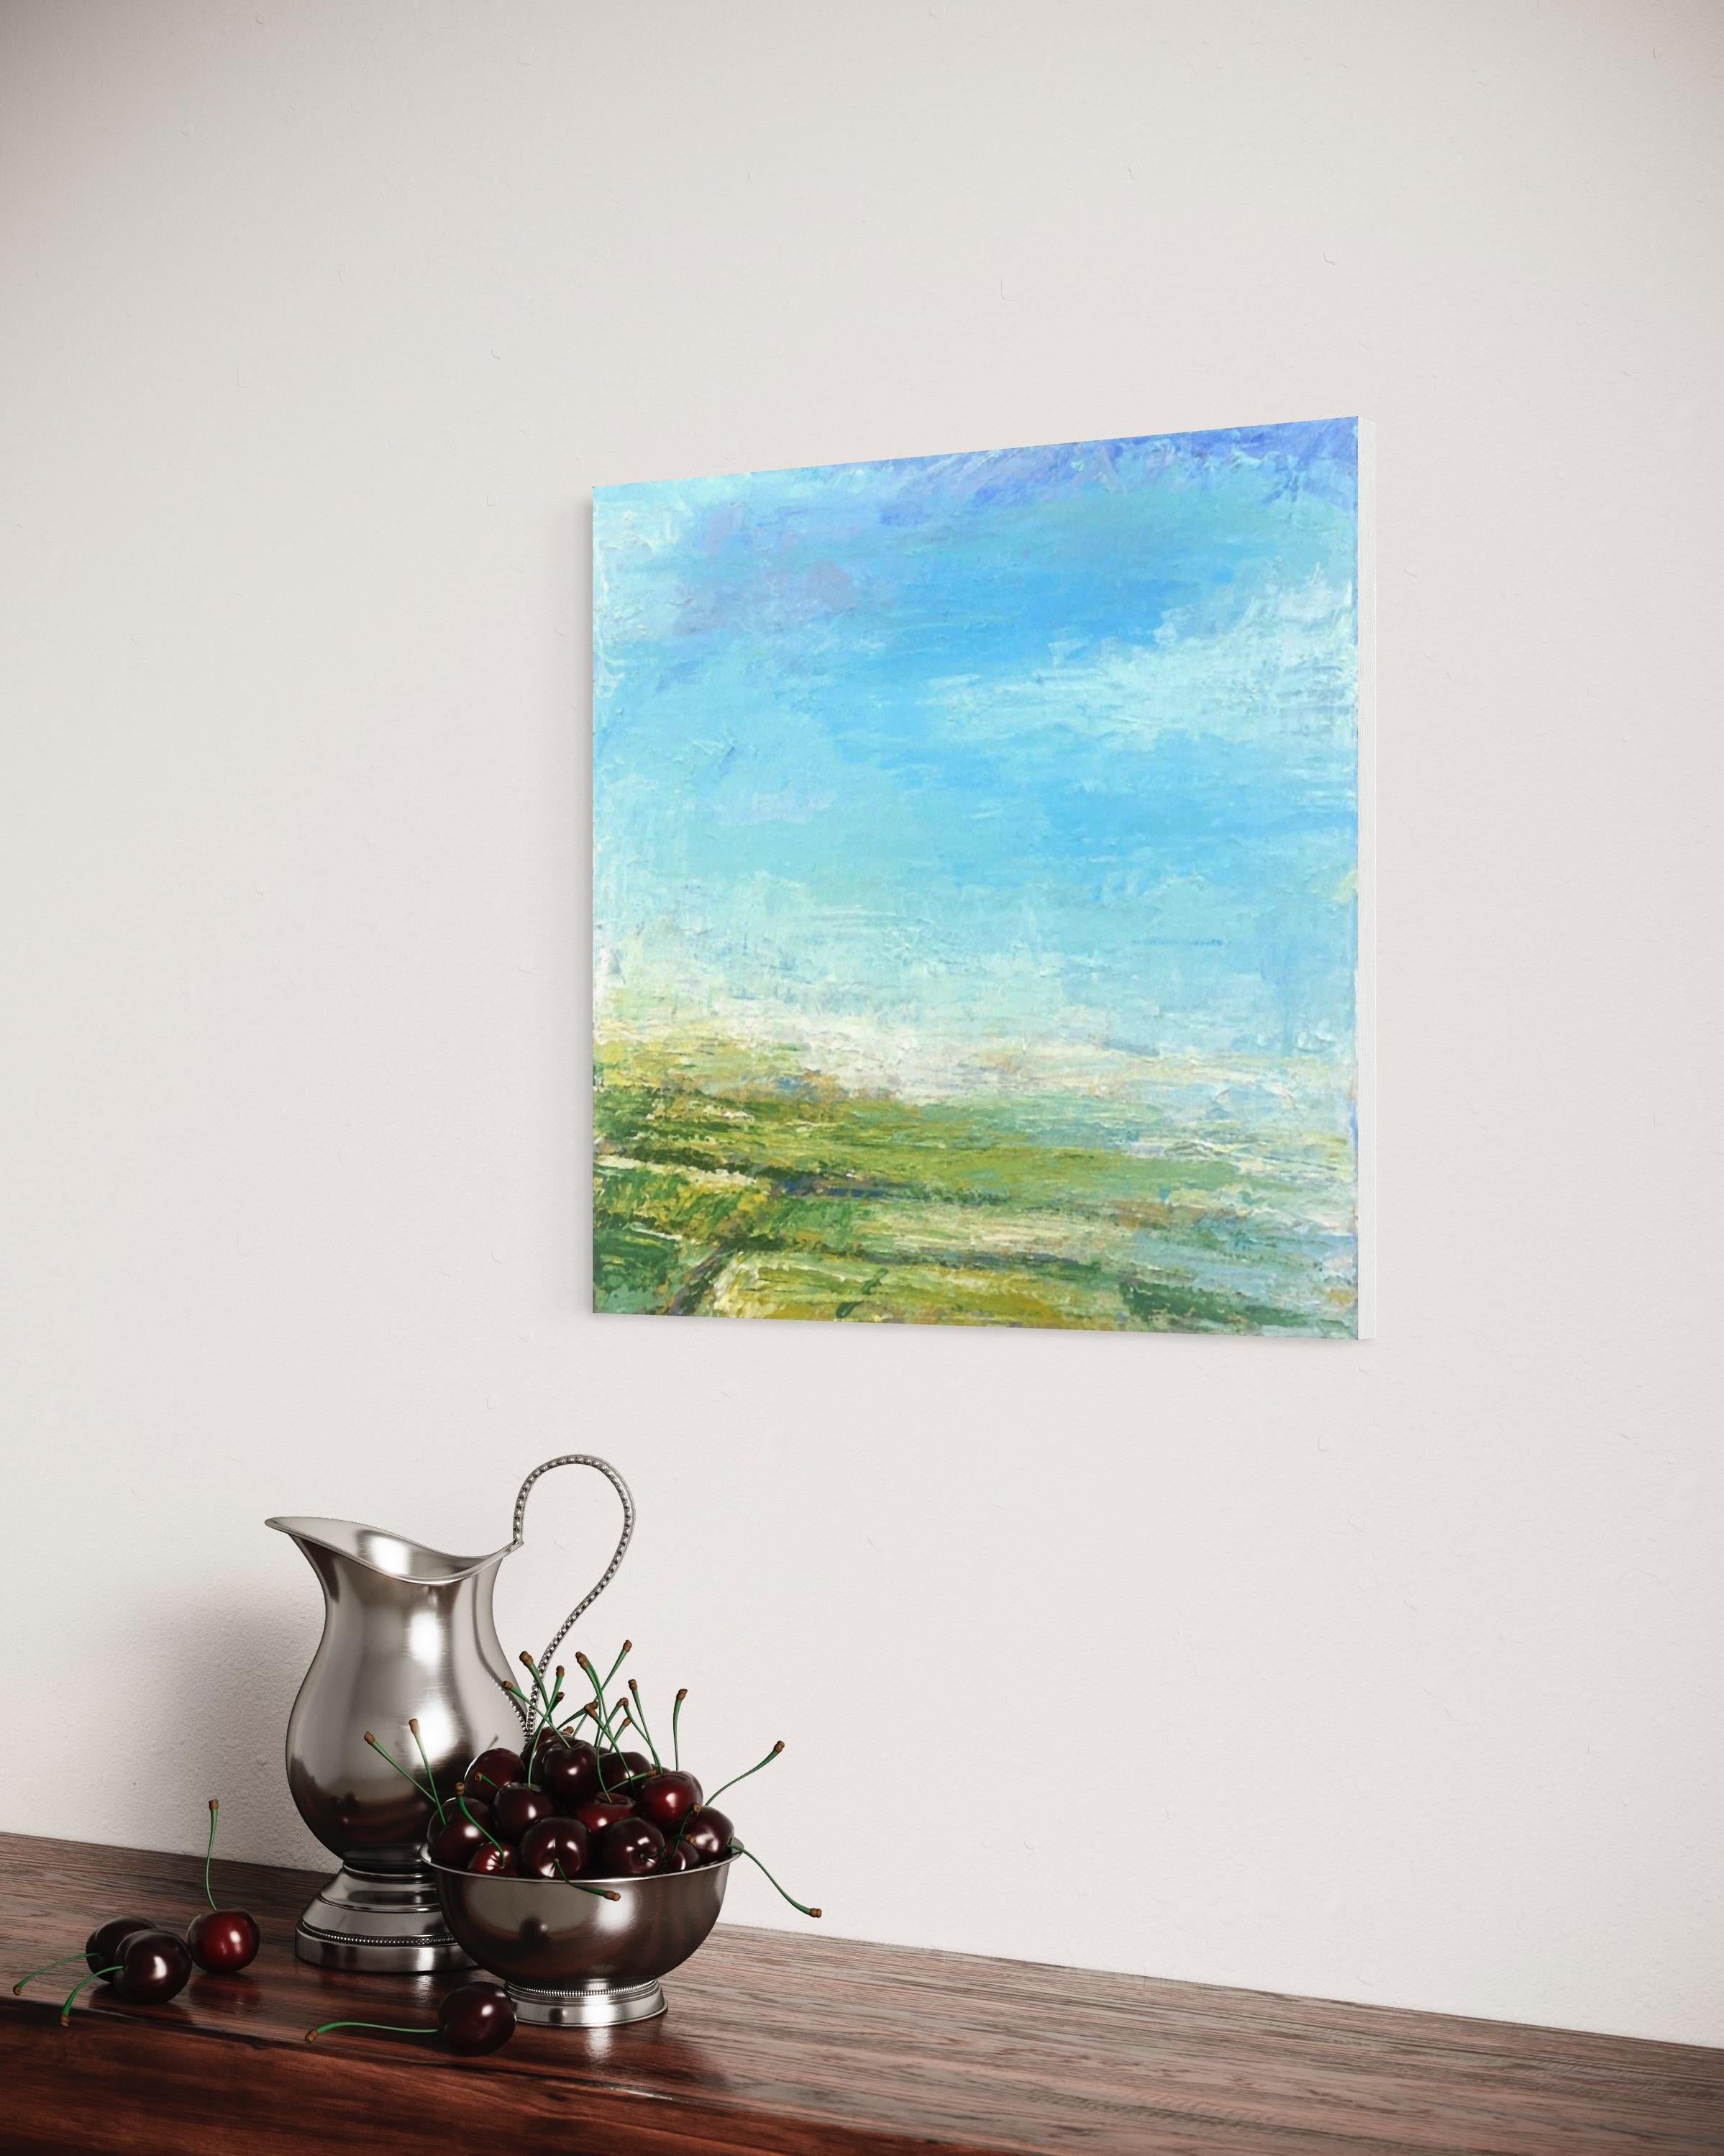 This landscape painting is a celebration of the ocean and where it meets the coast.  There is such magic when we spend time near the sea.  So many memories we create that way.  Color is key here in order to create an ambiance of calm and serenity.